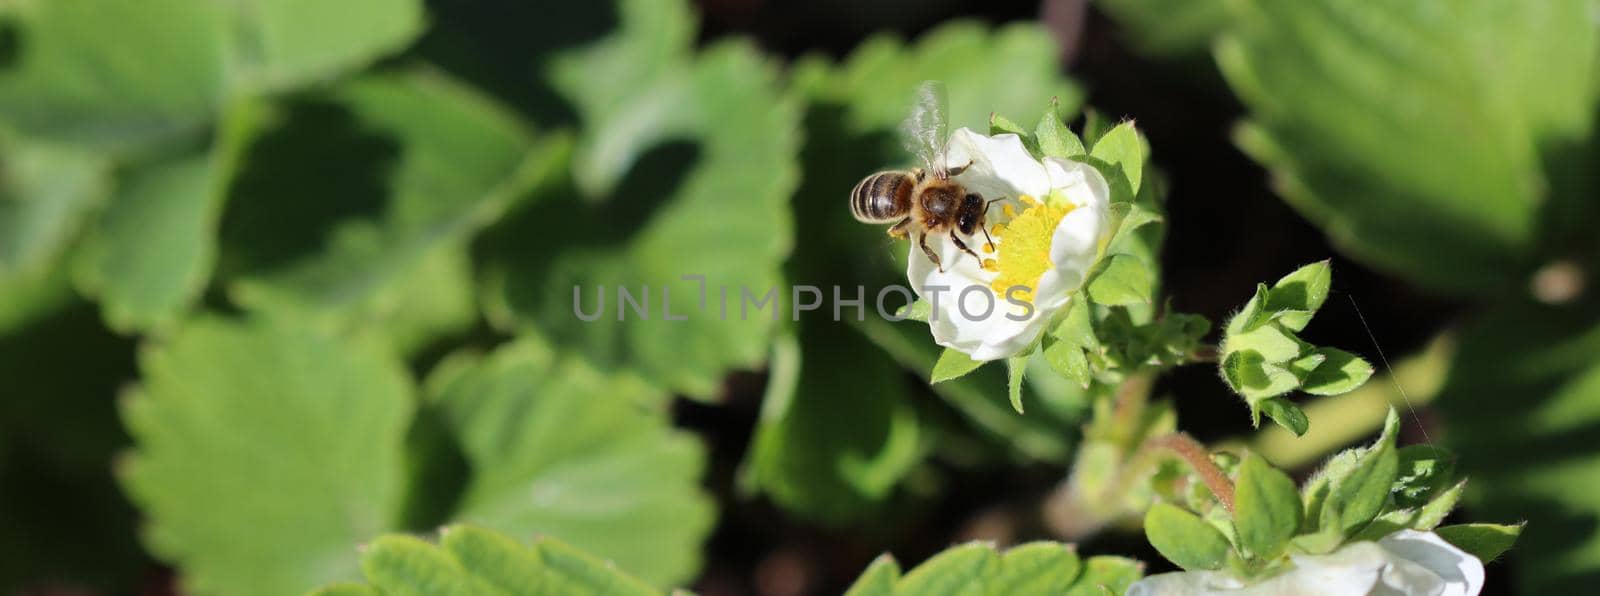 Blooming strawberry with flying bee on an organic farm. Gardening concept